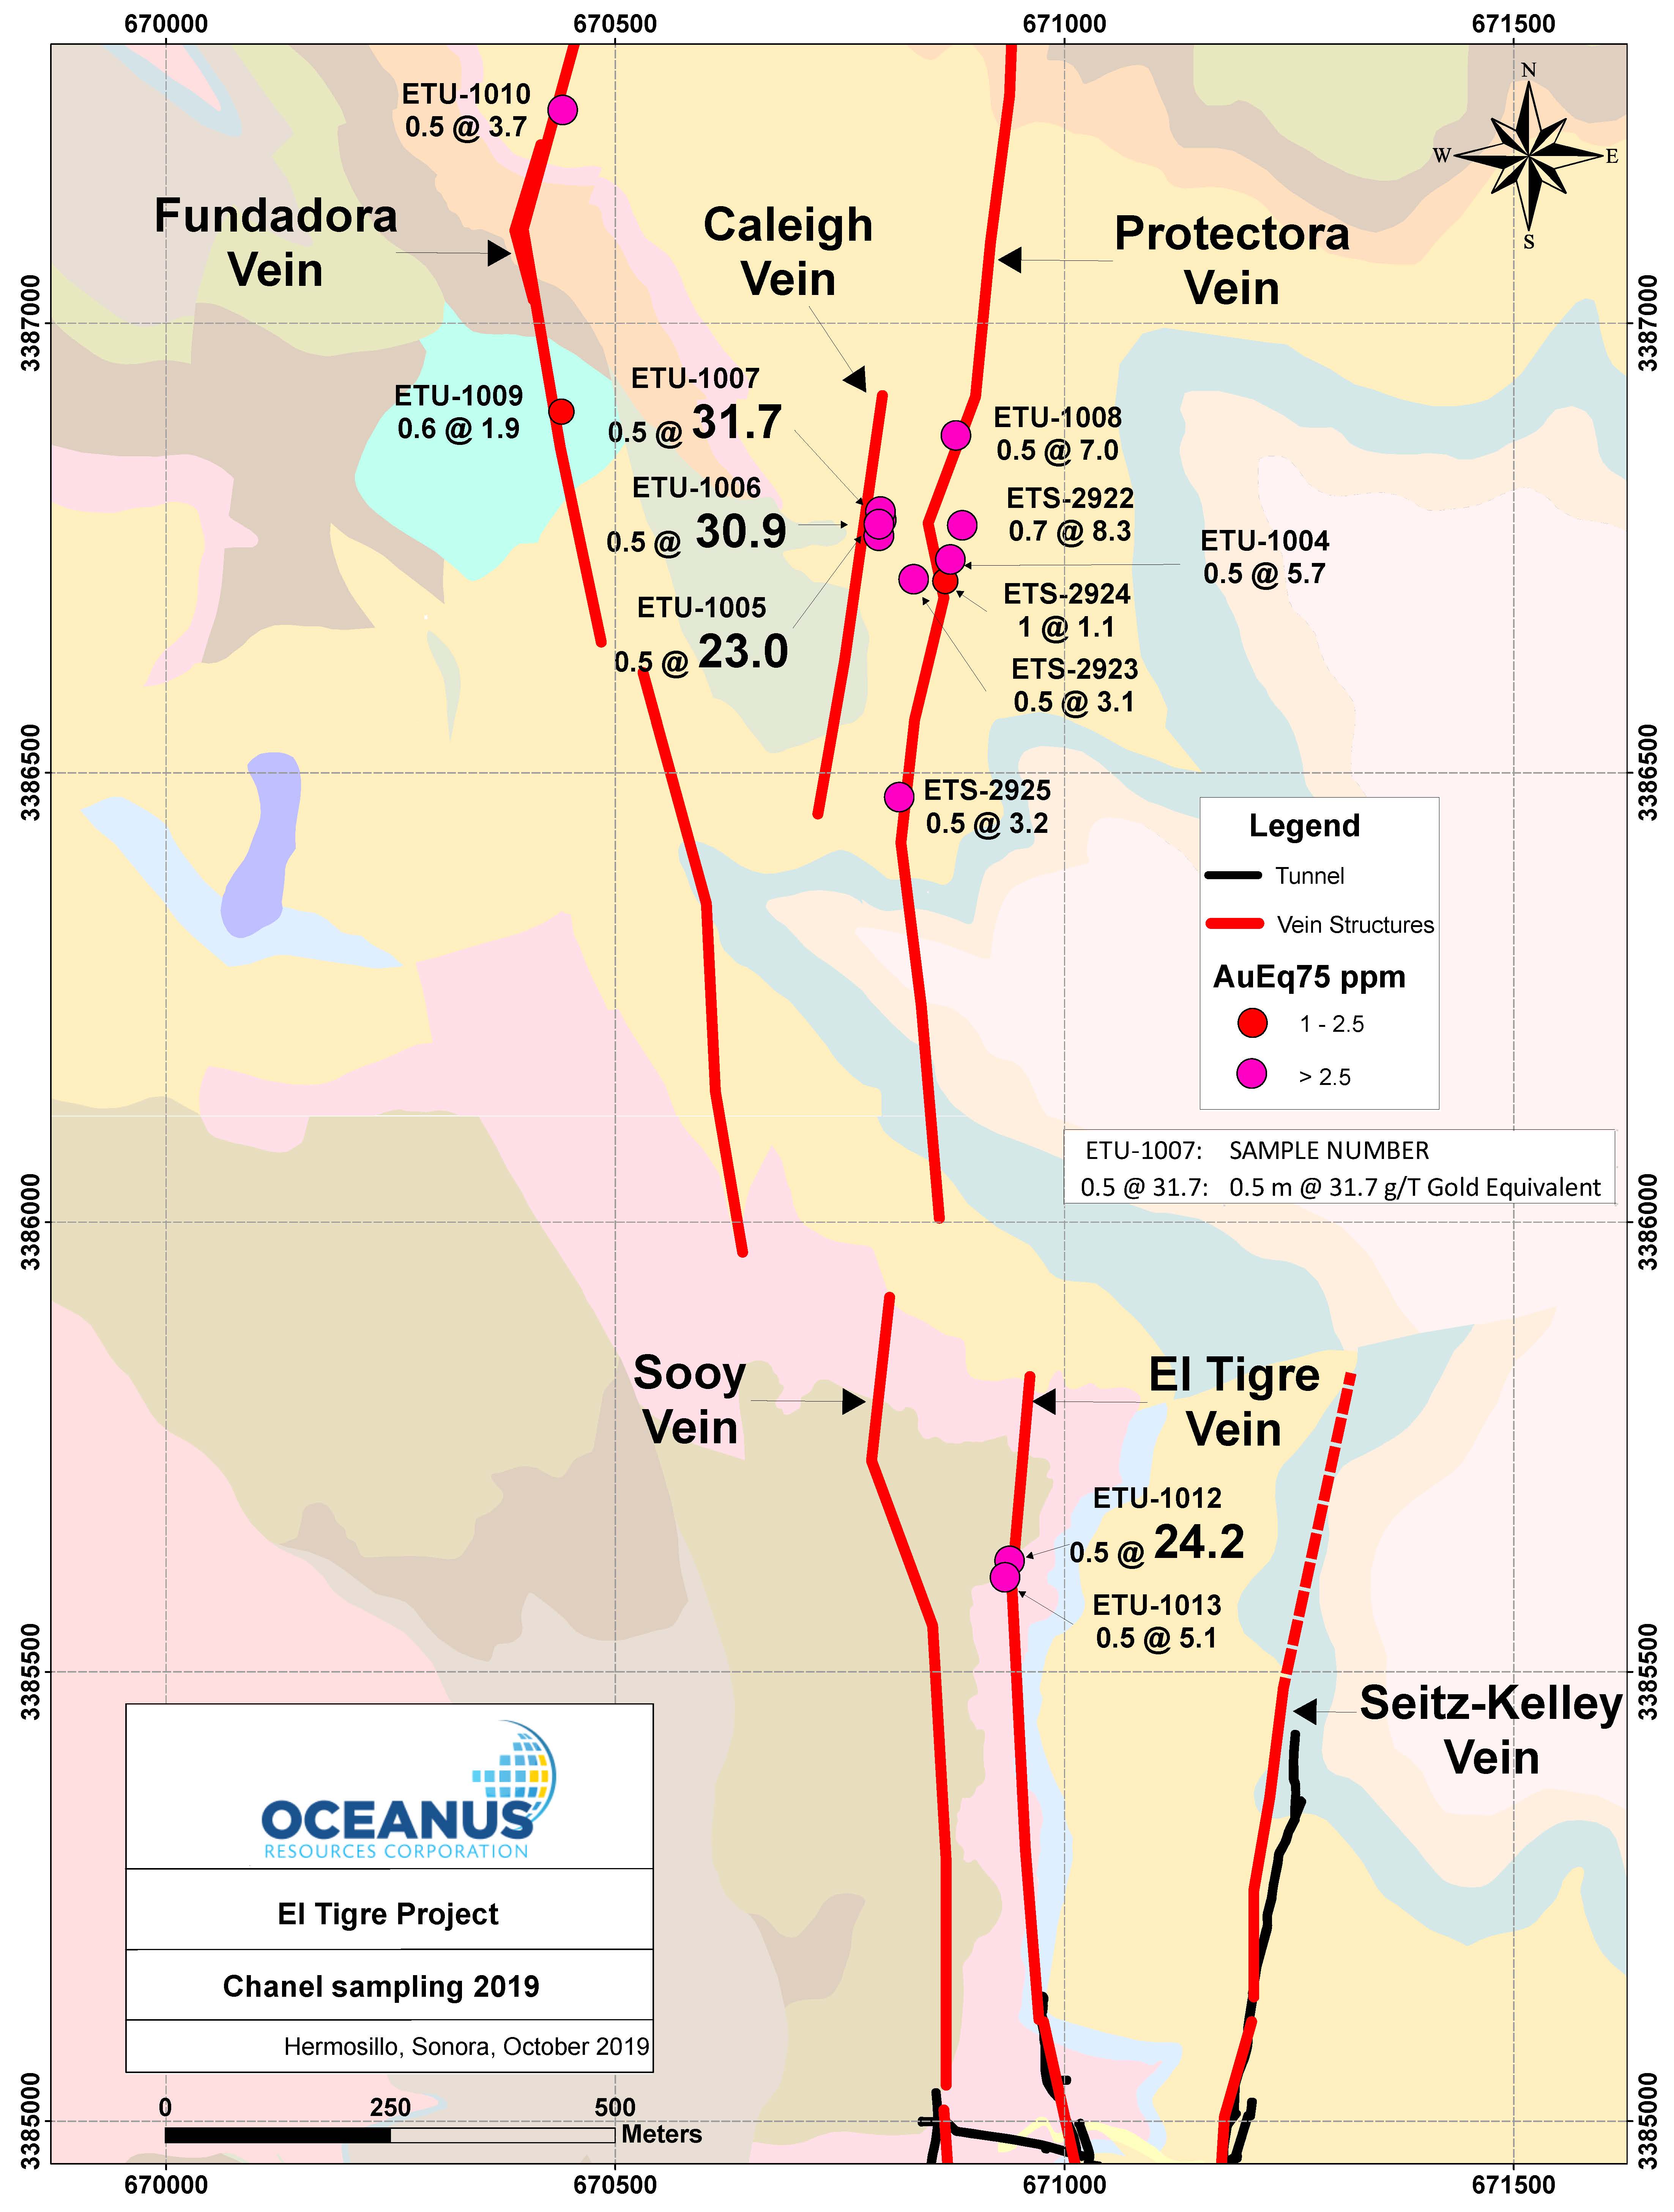 Oceanus Resources Corporation, Friday, November 1, 2019, Press release picture